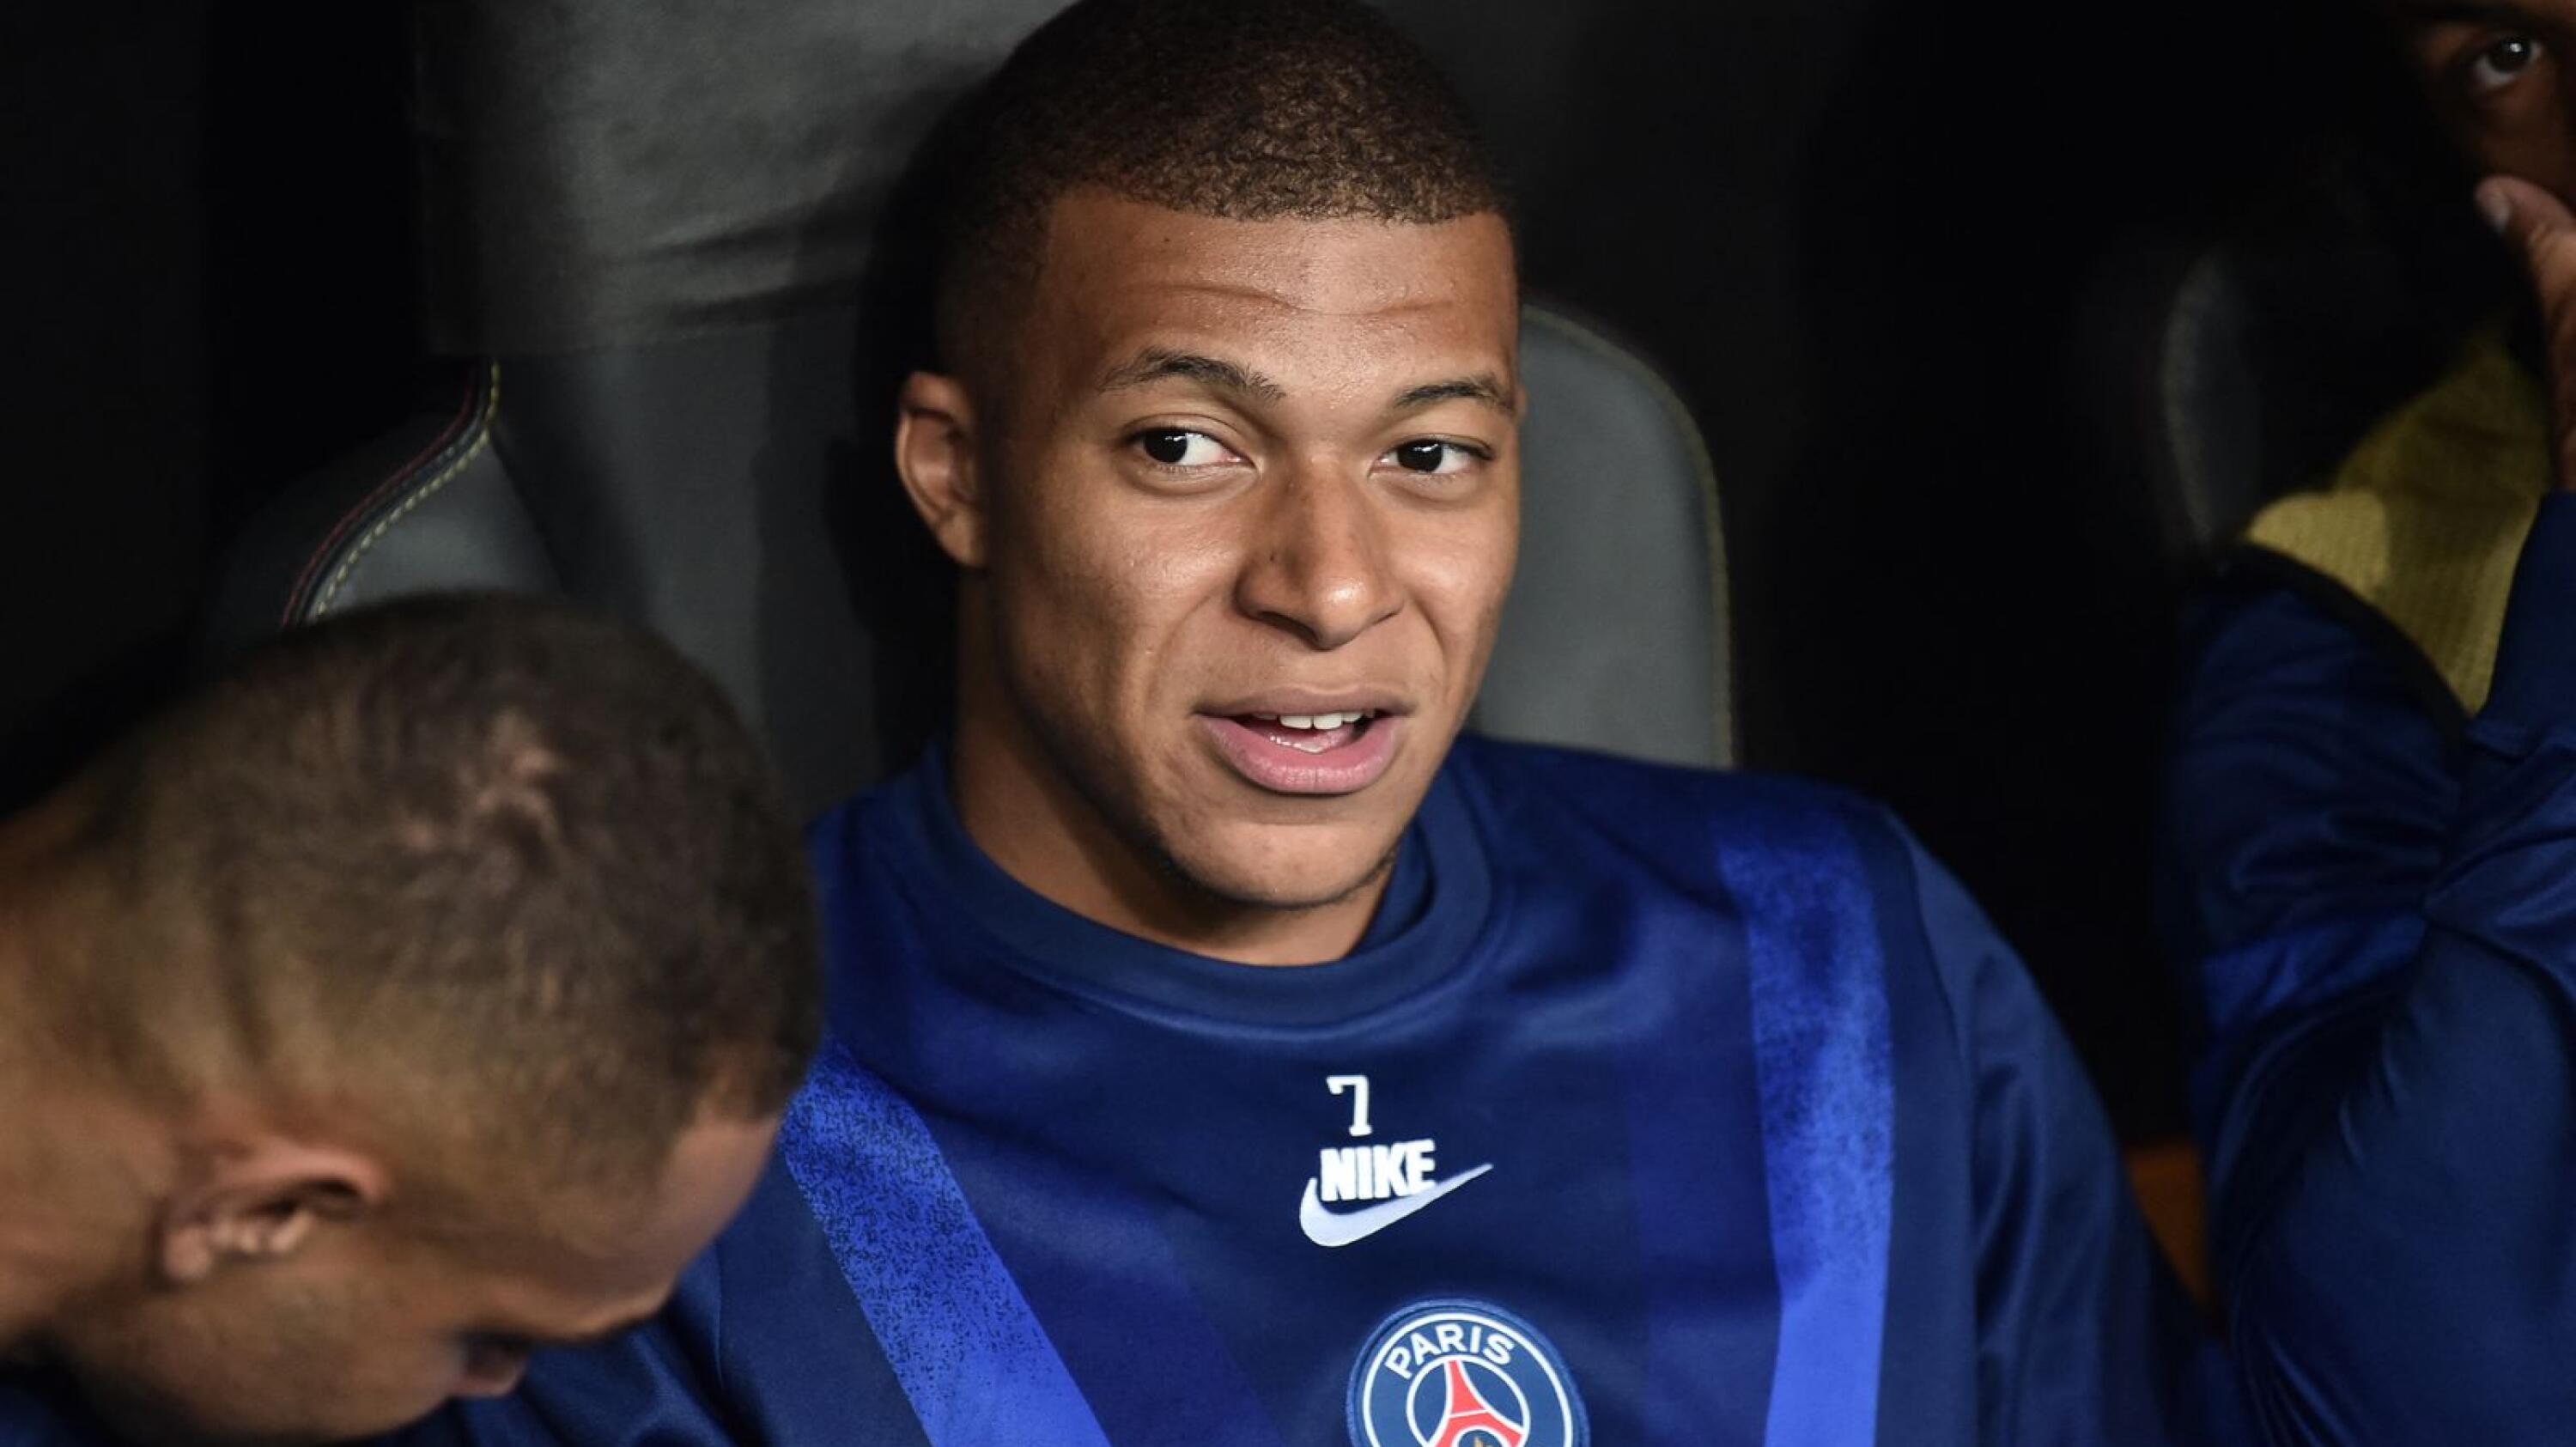 Paris Saint-Germain's Kylian Mbappe is seen on the substitutes' bench during a UEFA Champions League game